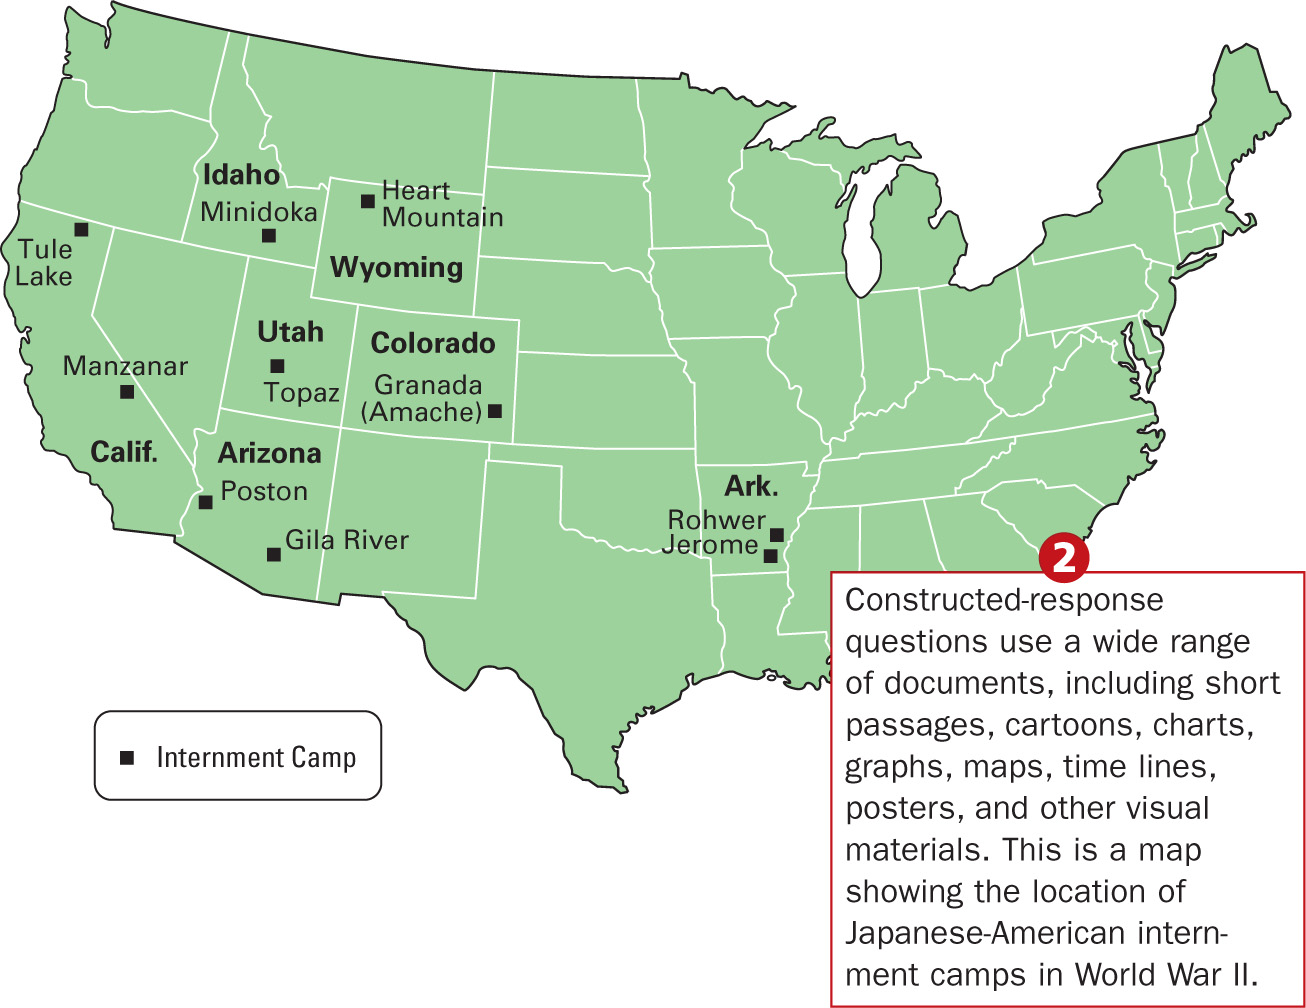 A map shows Japanese-American Internment camps during World War II.